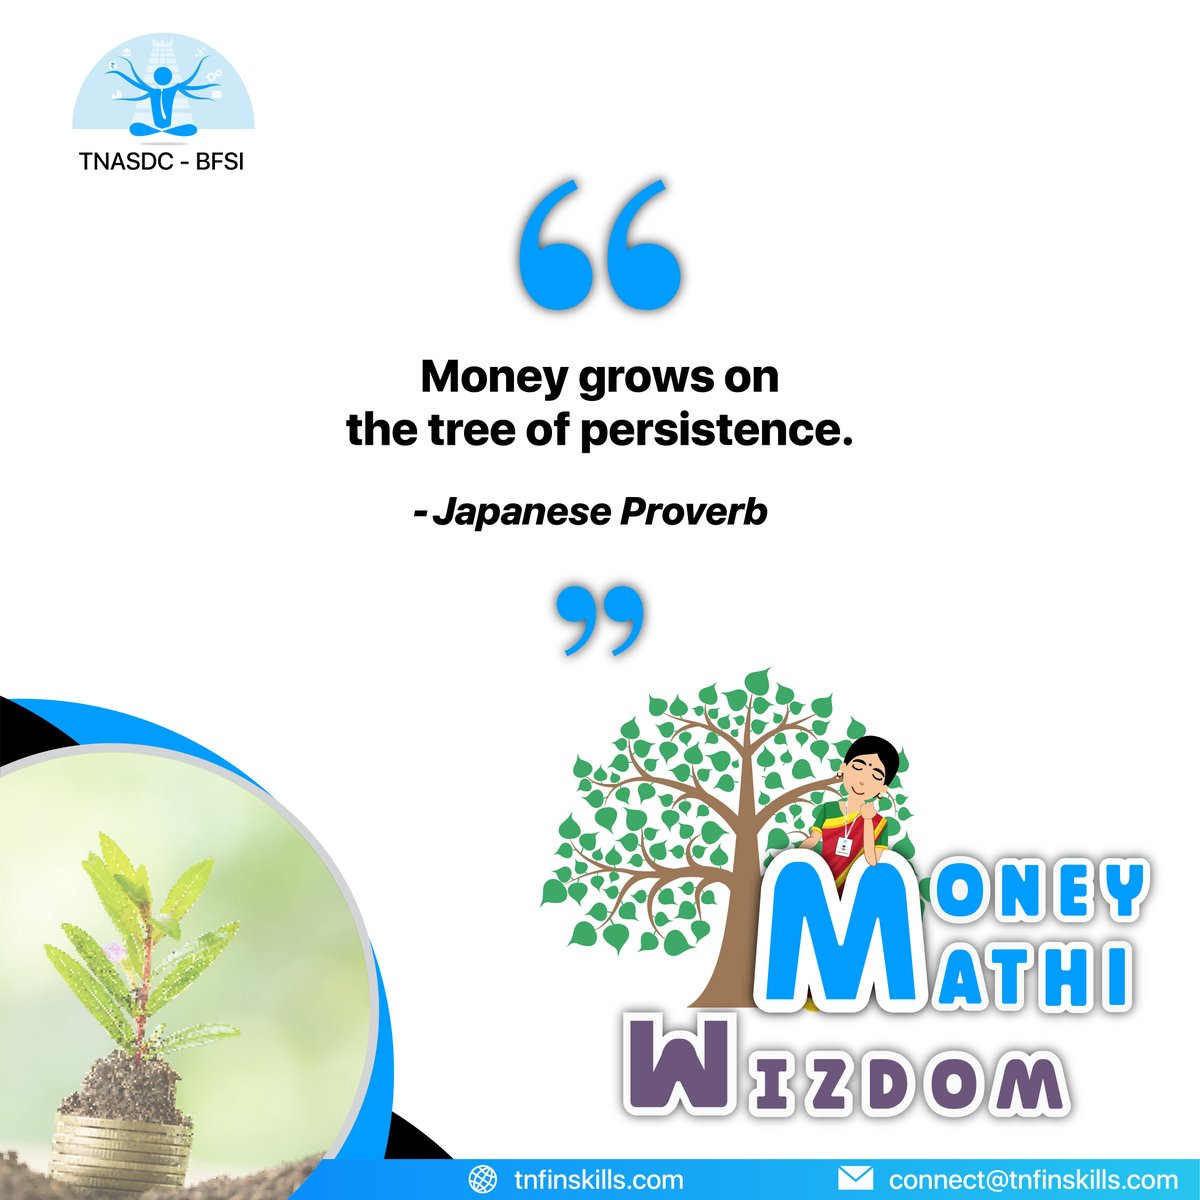 MoneyMathi Wizdom 

👉Just like a tree takes time to grow and bear fruit, financial success requires patience and persistence.

✅Follow us on our social media to learn and grow.  

#tnasdcbfsi #tnsdc #naanmudhalvan